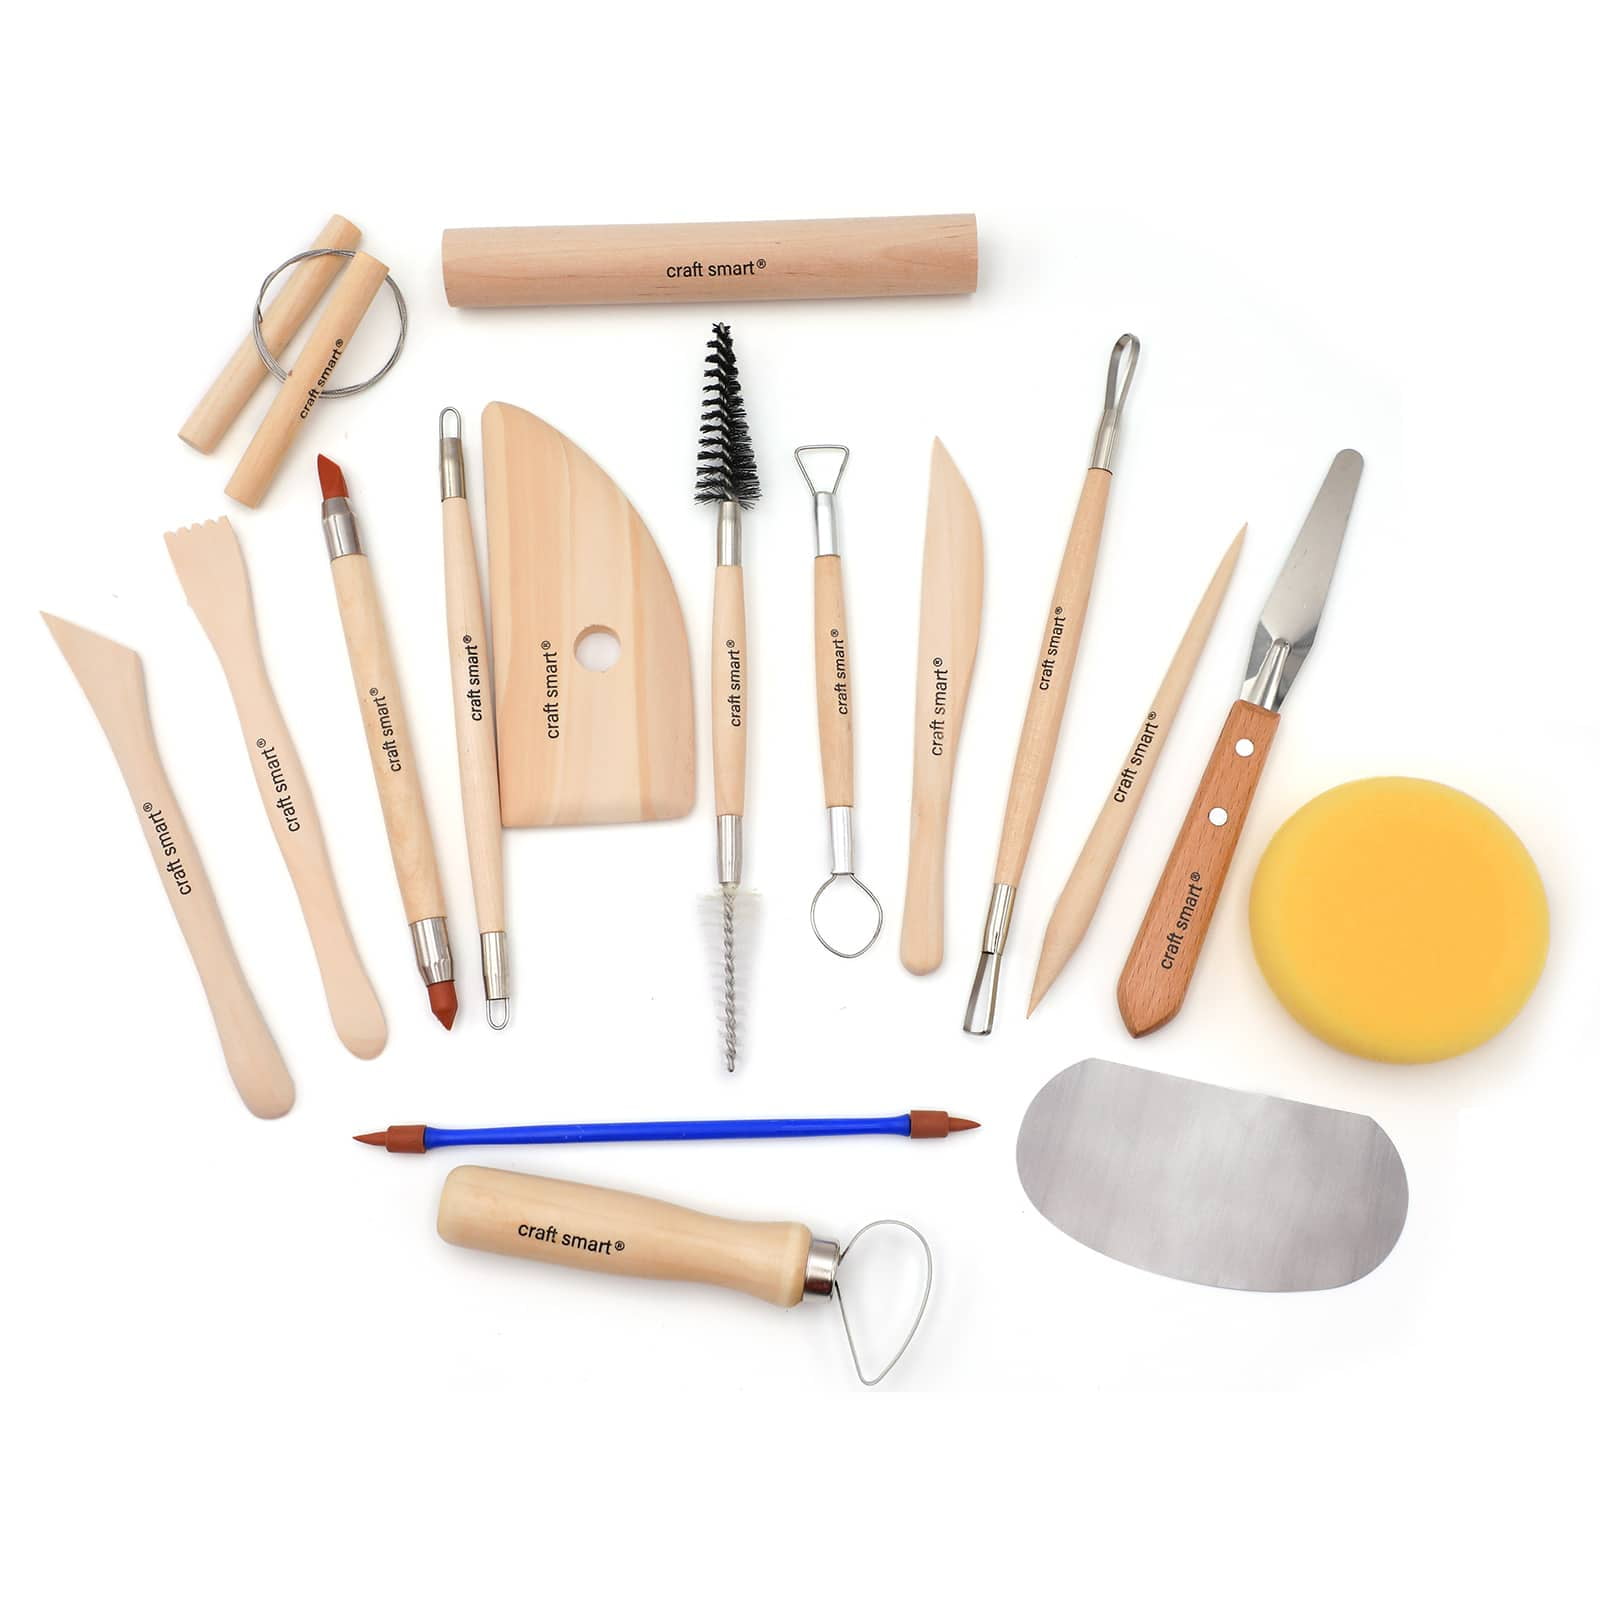 Clay Shaper Set #0 by Craft Smart